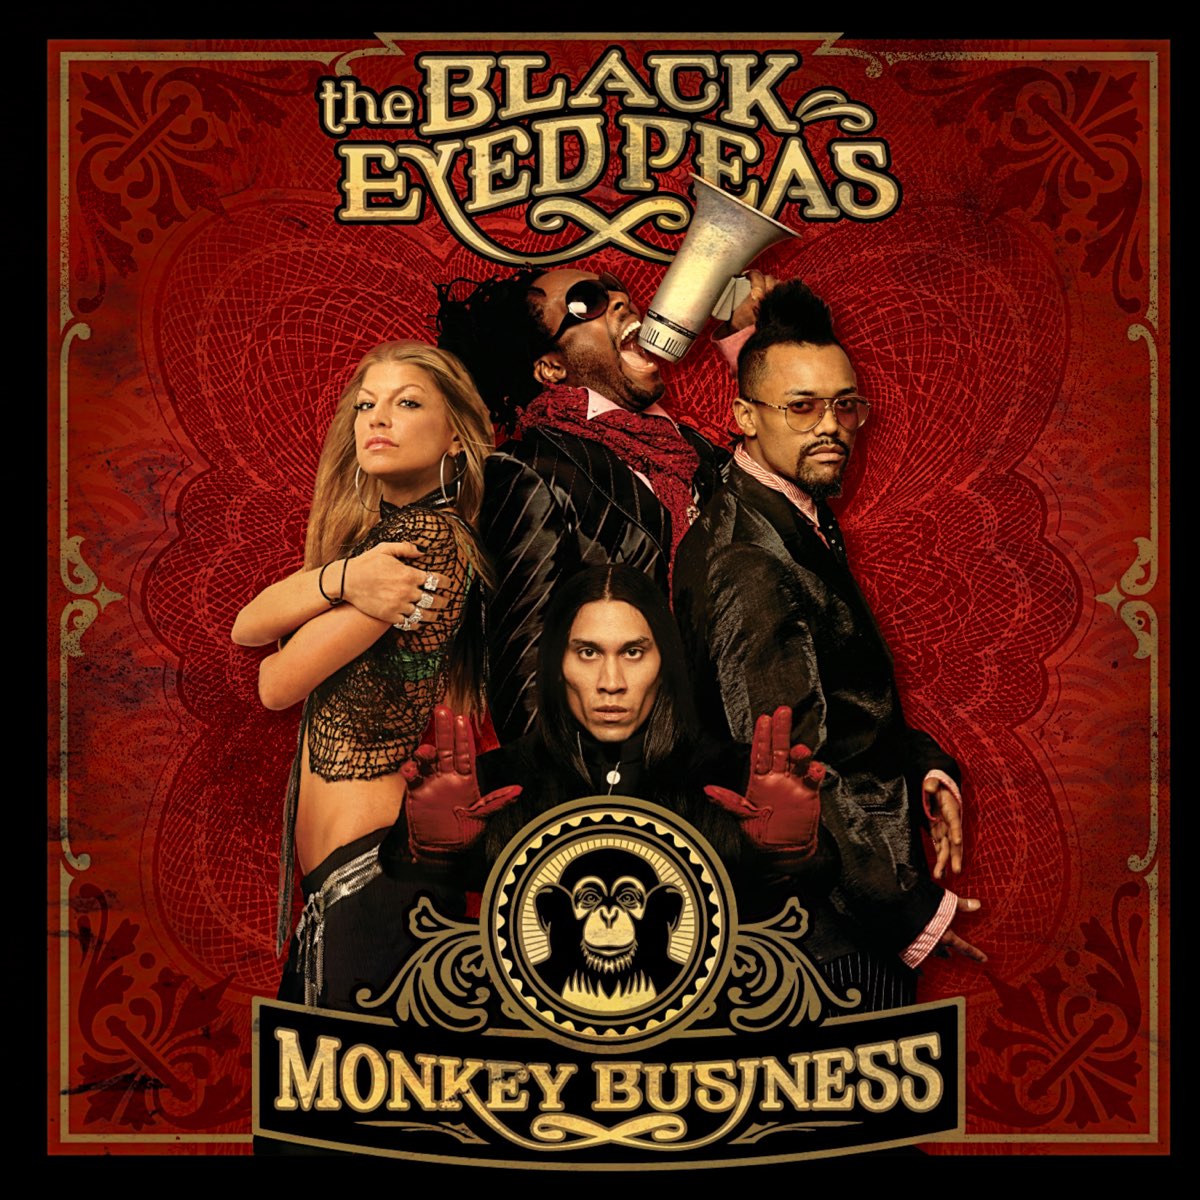 Monkey Business by Black Eyed Peas on Apple Music